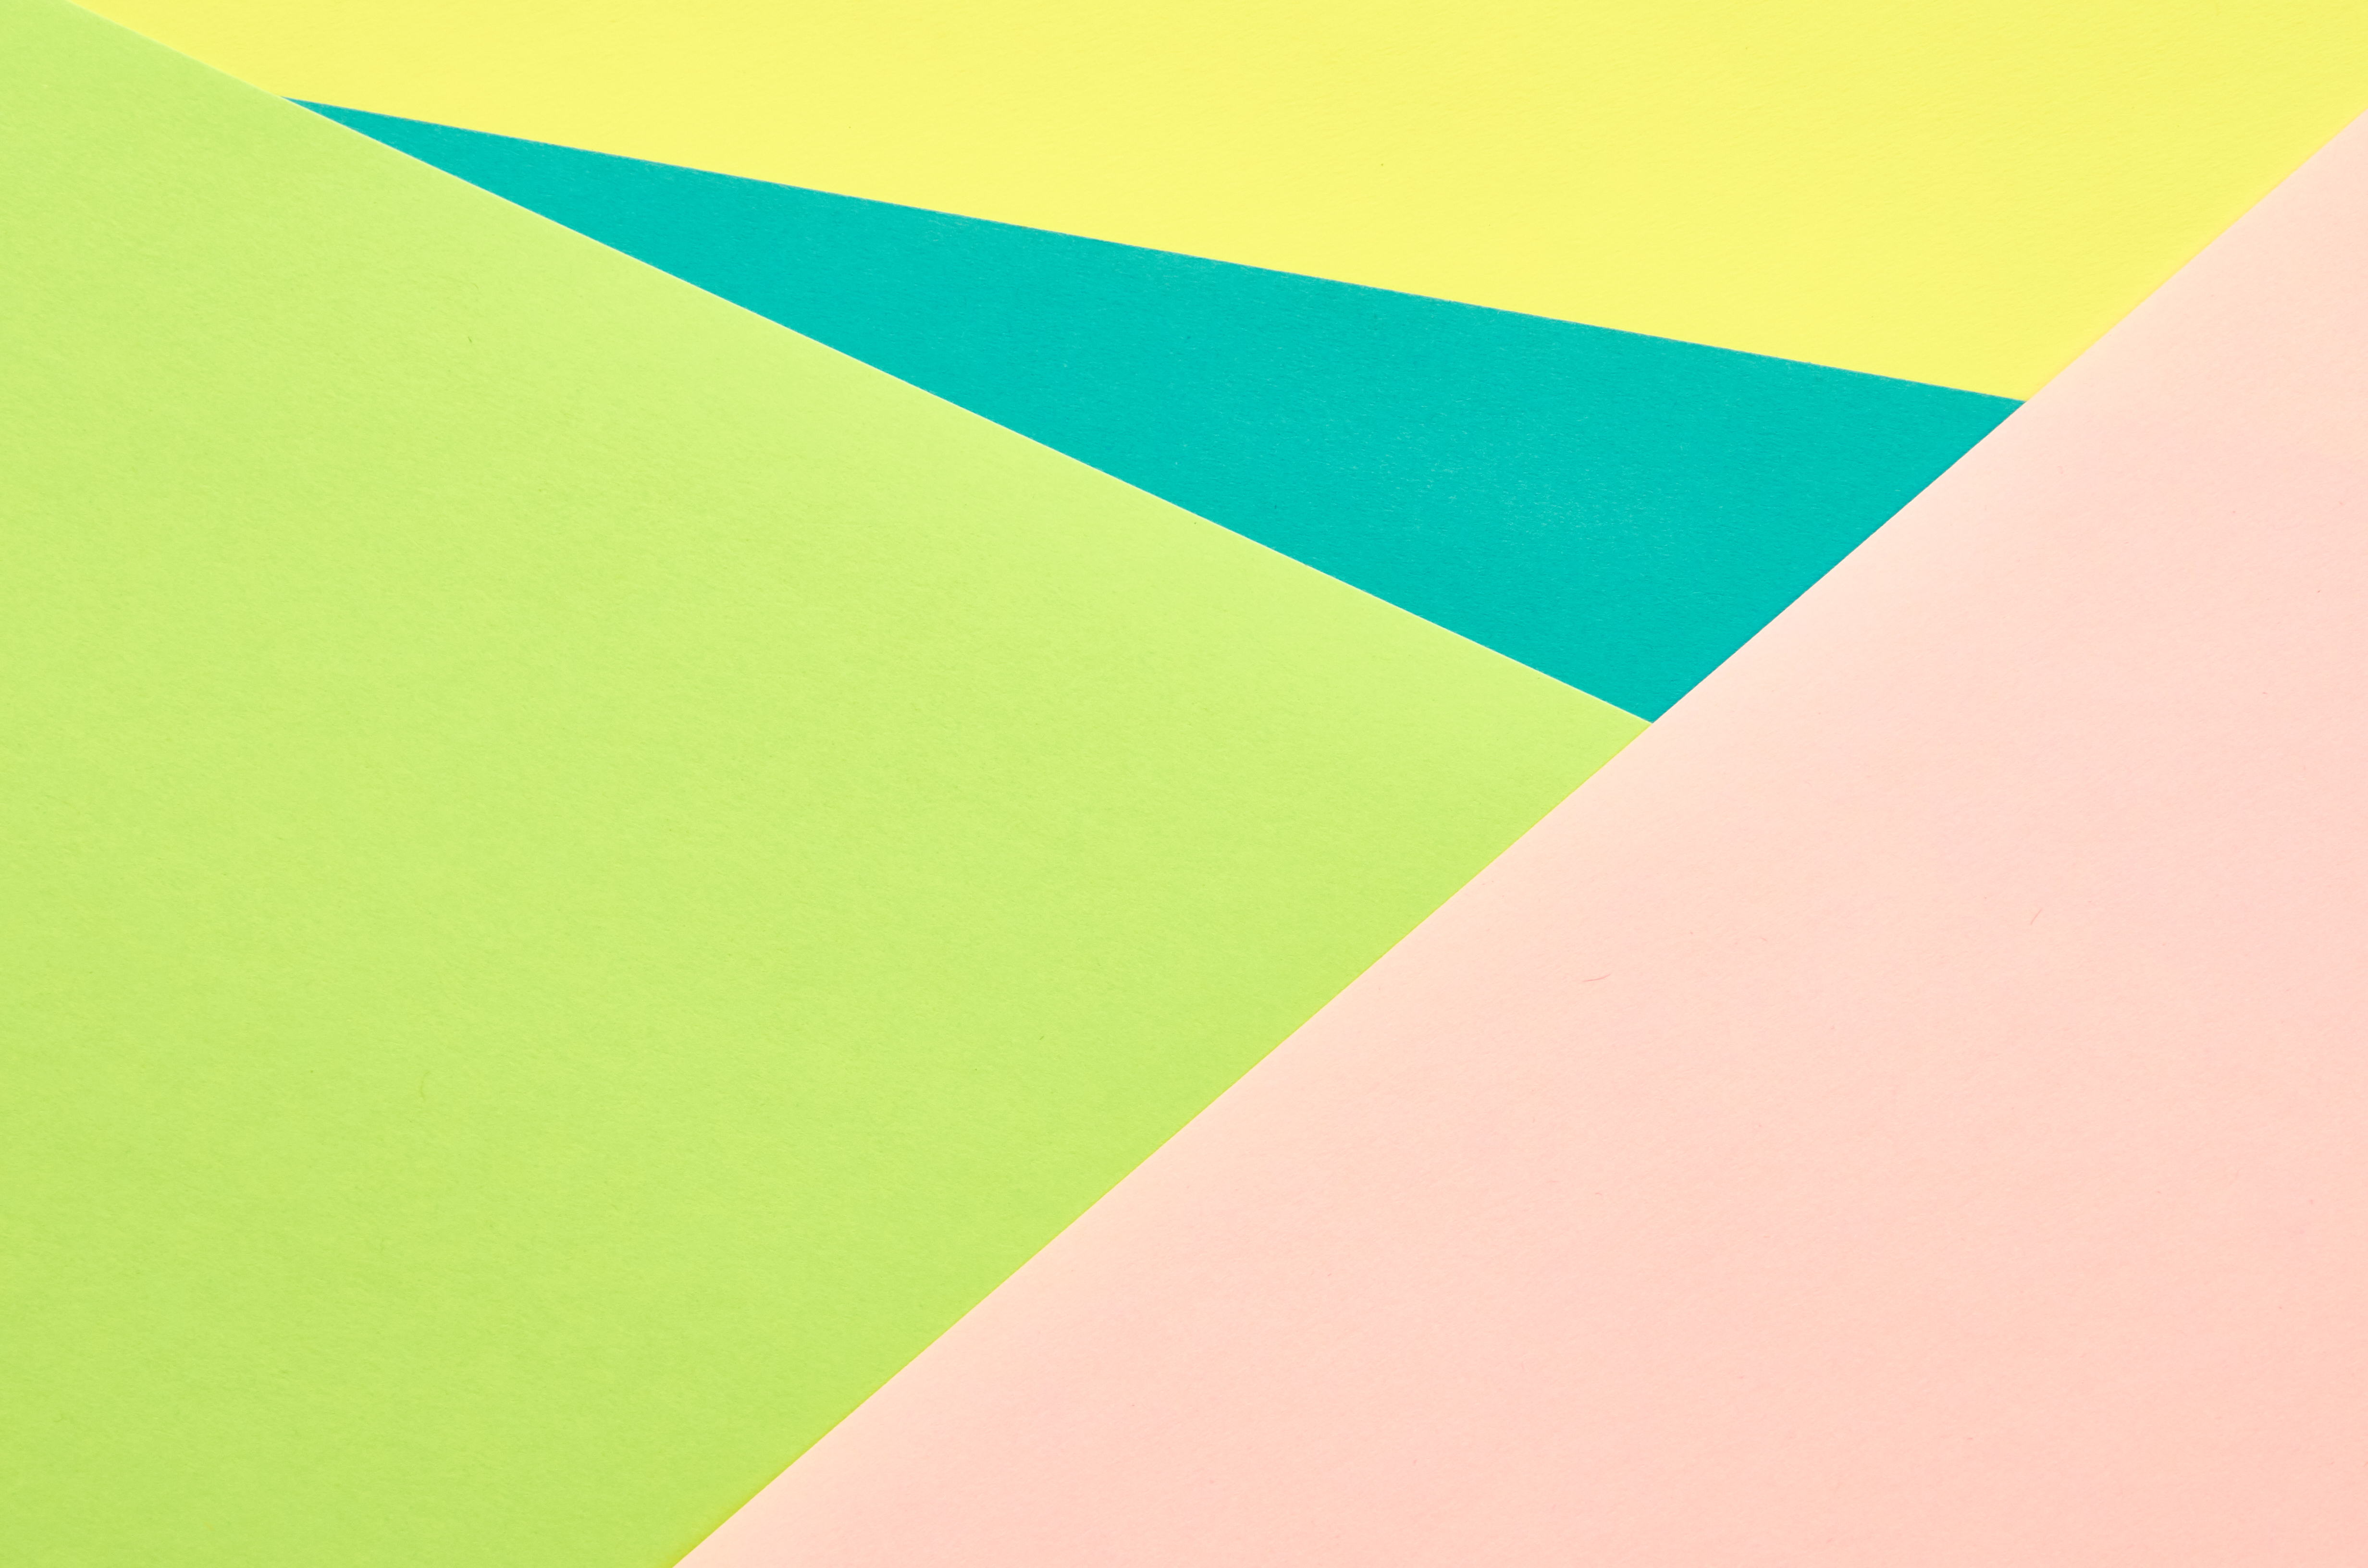 motley, multicolored, abstract, shape, shapes, triangles, fragments 2160p